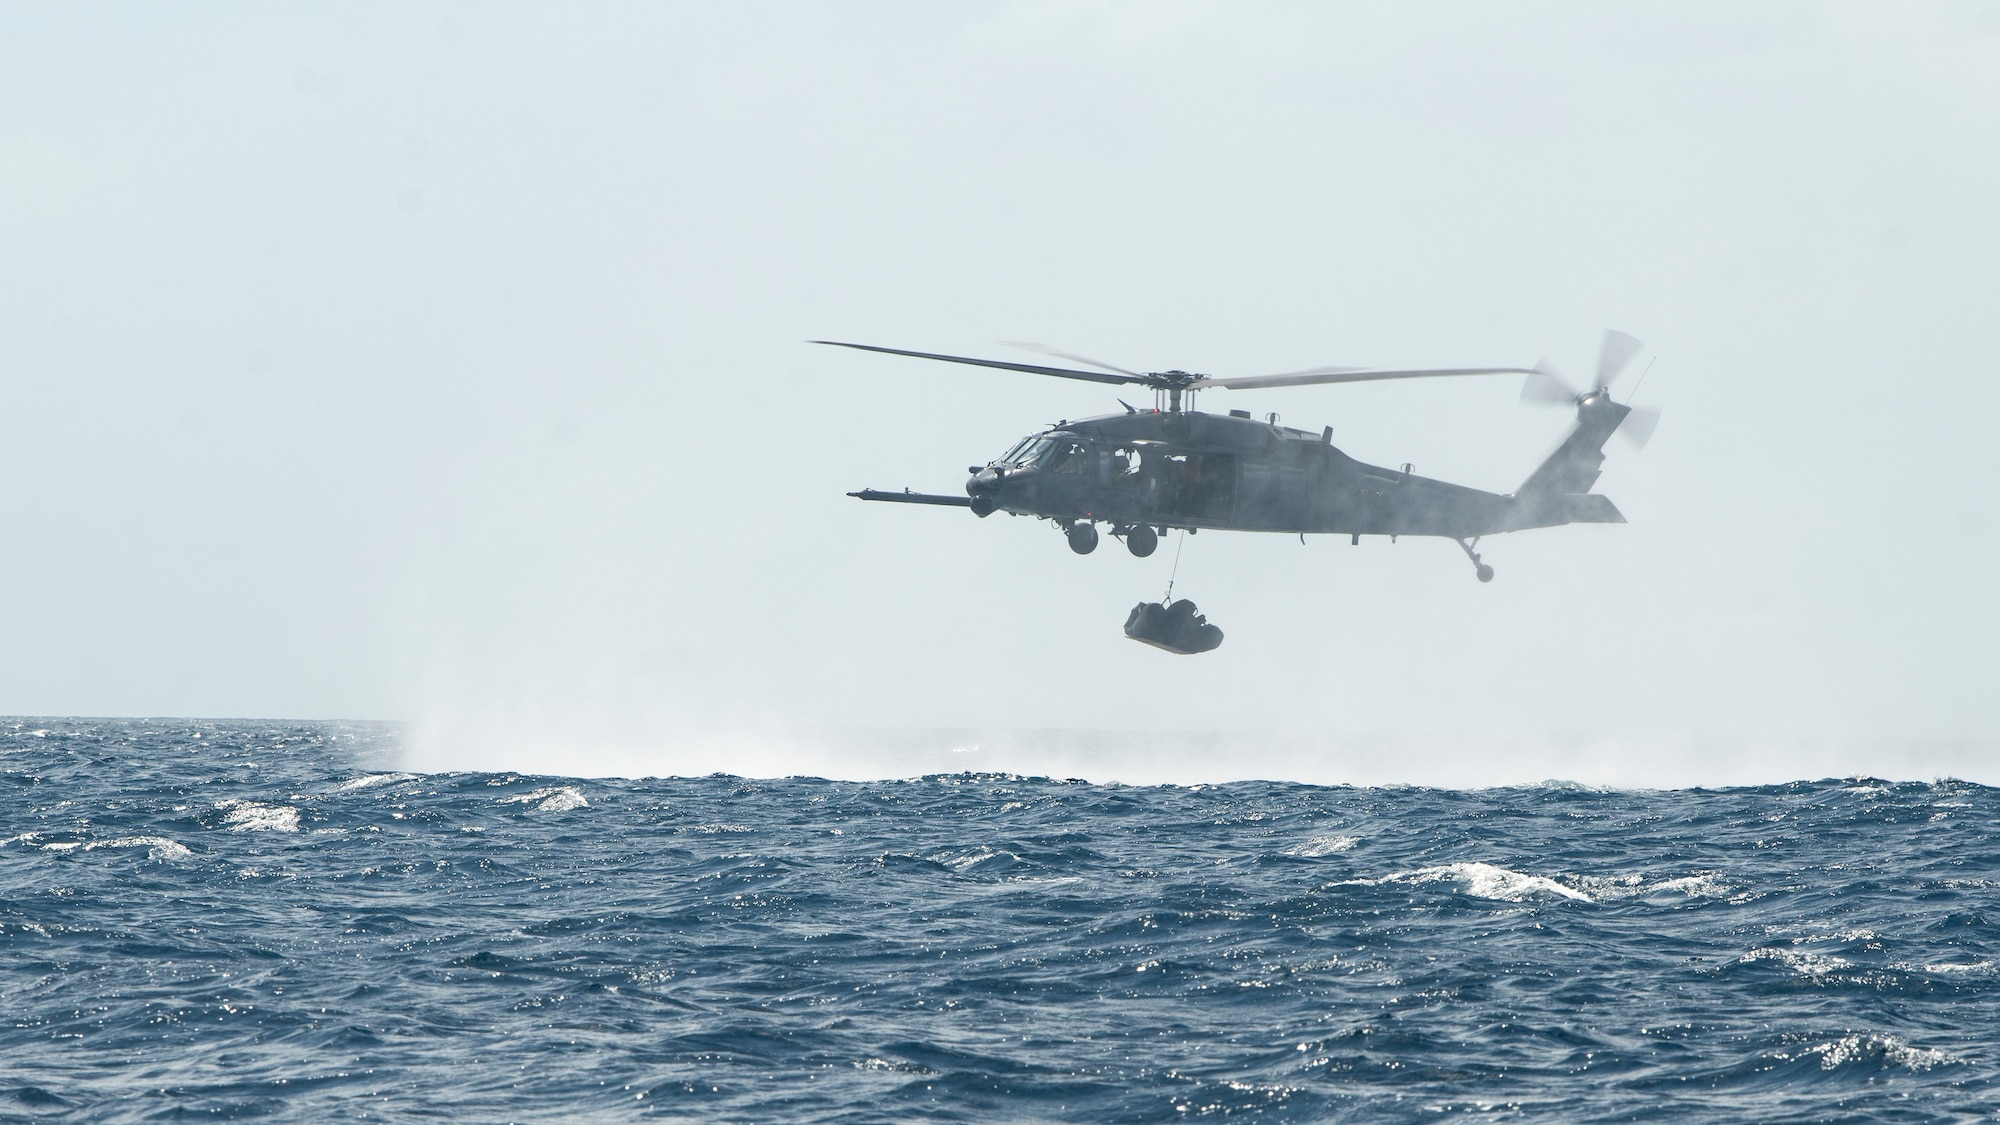 An HH-60G Pave Hawk assigned to the 33rd Rescue Squadron lowers a combat rubber raiding craft into the Pacific Ocean, September 13, 2022. The CRRC, also known as a tethered duck in this scenario, is dropped into the water and inflated by pararescuemen once they exit the aircraft. (U.S. Air Force photo by Senior Airman Jessi Roth)